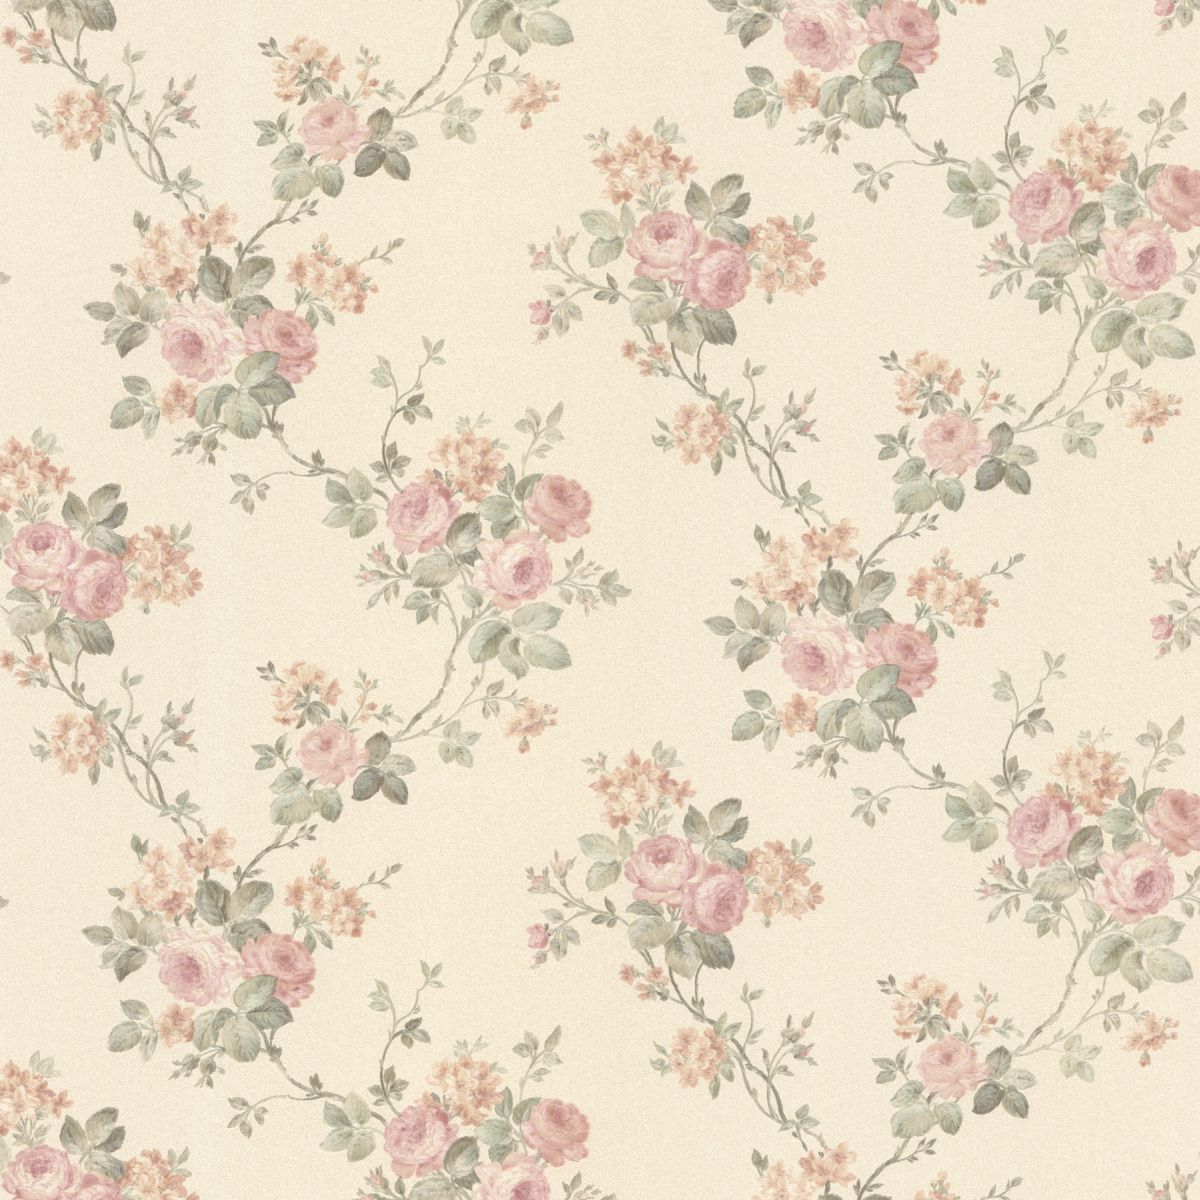 Vintage Country Background